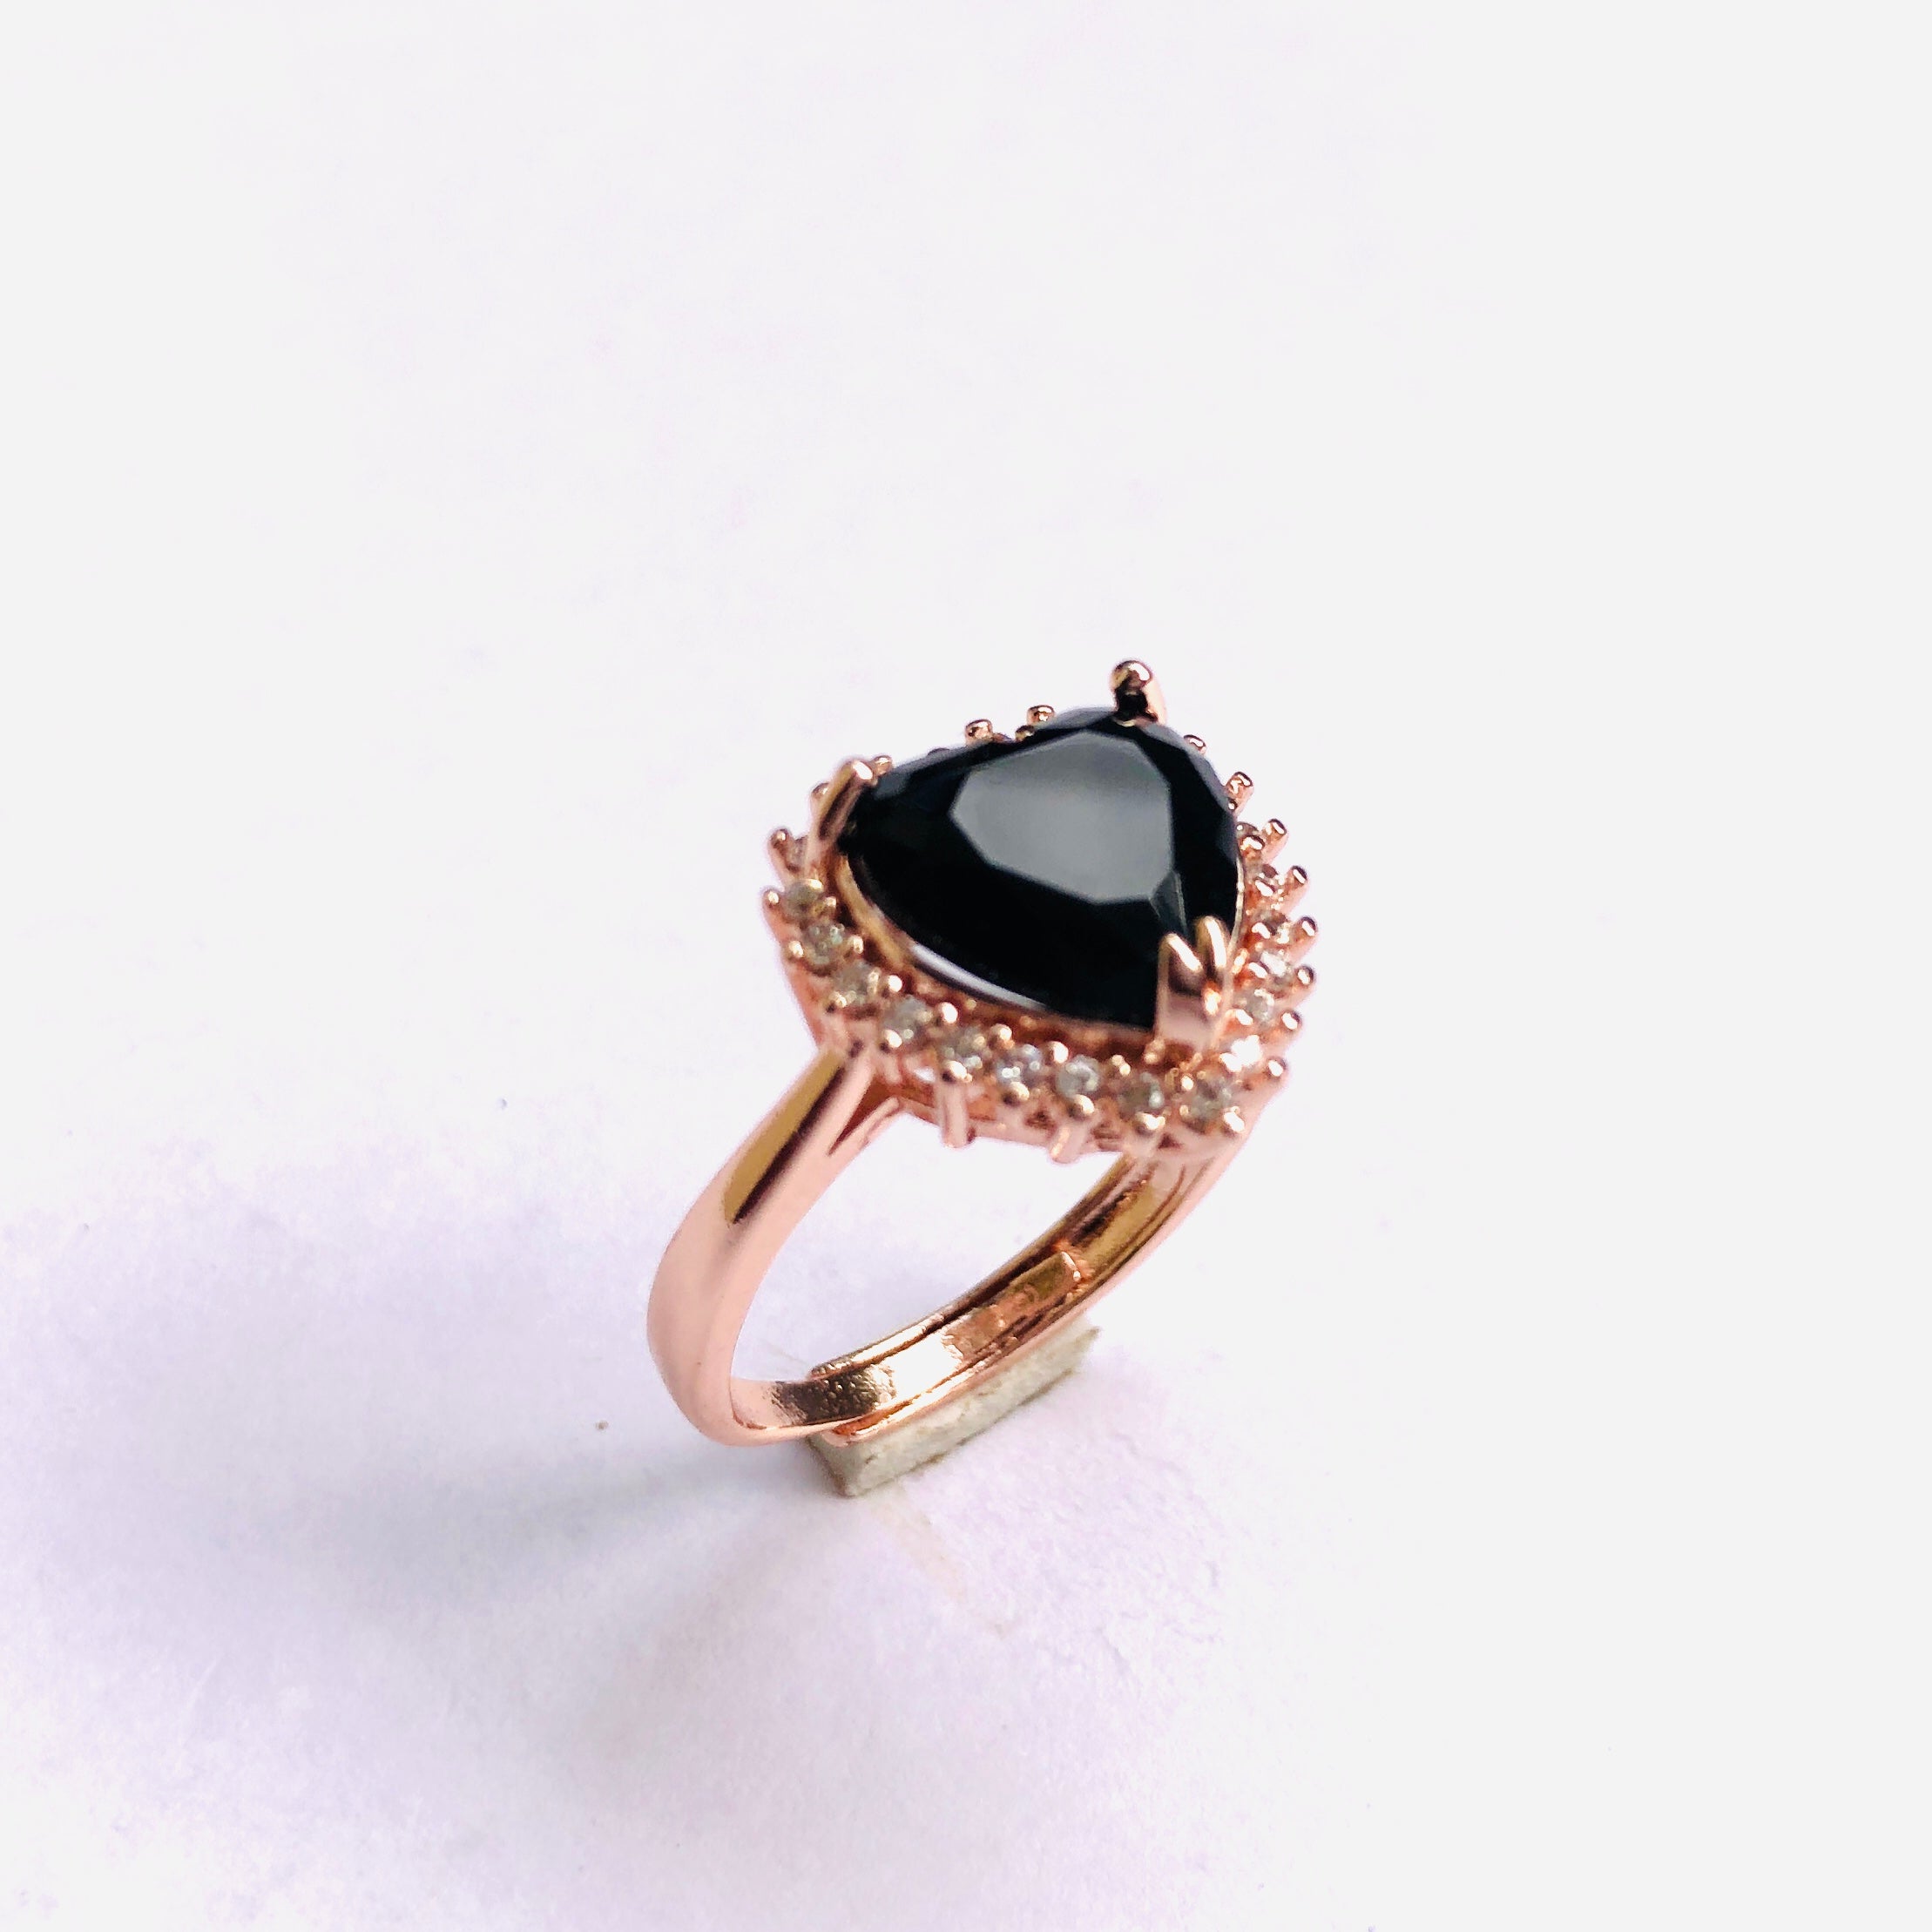 1.63ct Natural Black Onyx Heart Shape Stone in 14K Rose Gold Plated  Engagement Ring, Antique Heart Black Stone Ring, Gift for Wife Birthday -  Etsy